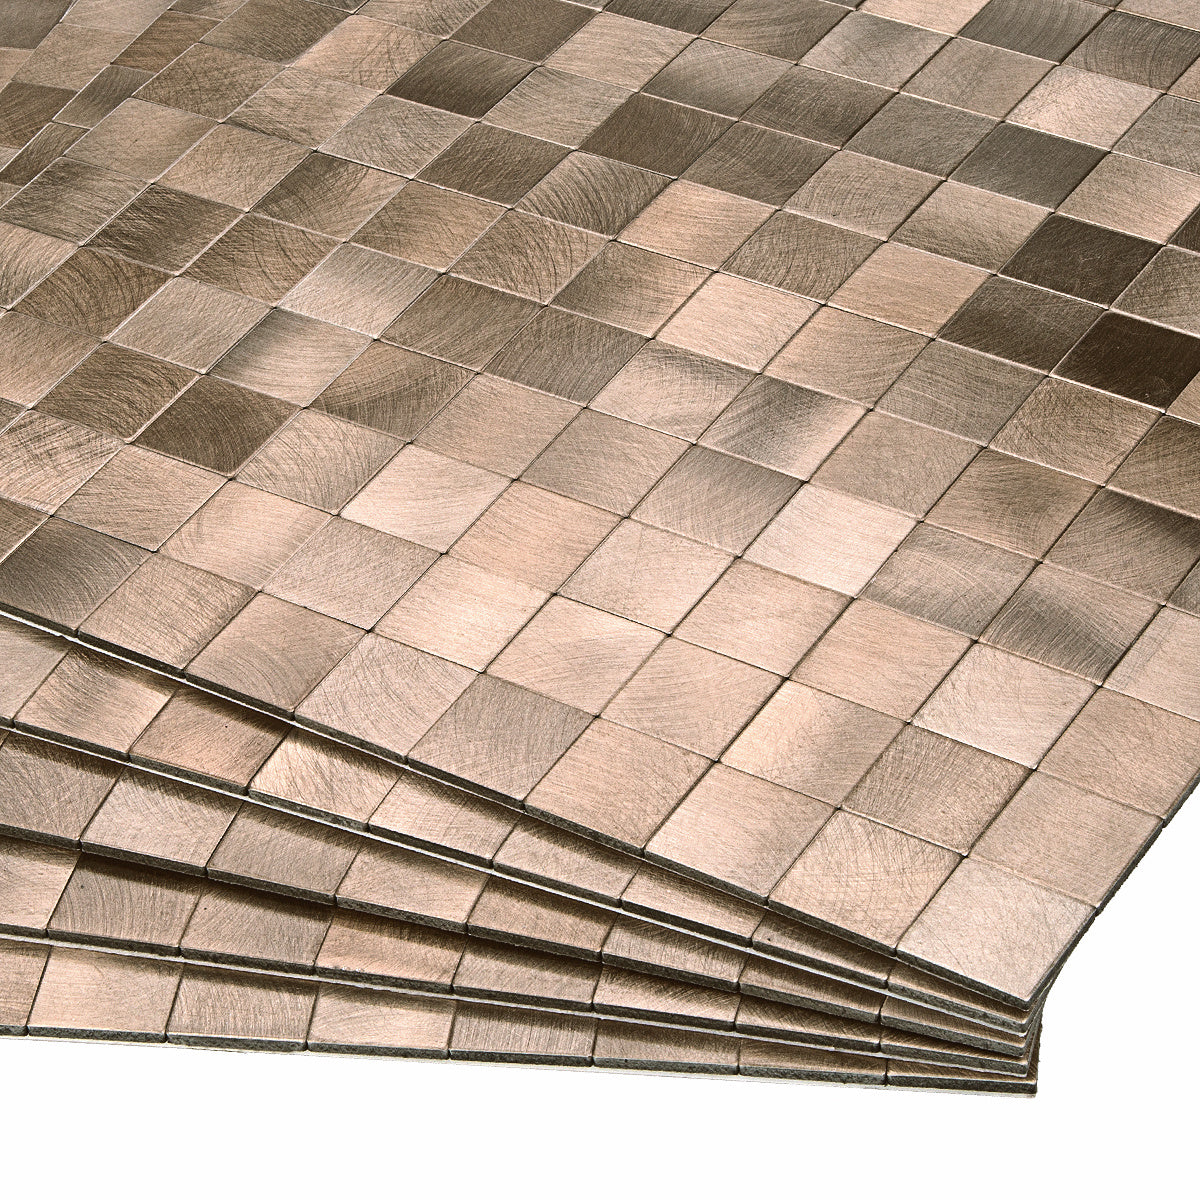 Decopus Metal Tile  Peel and Stick Backsplash (MS25 Copper Matte) 12in x 12in, 4mm thick, Stick On